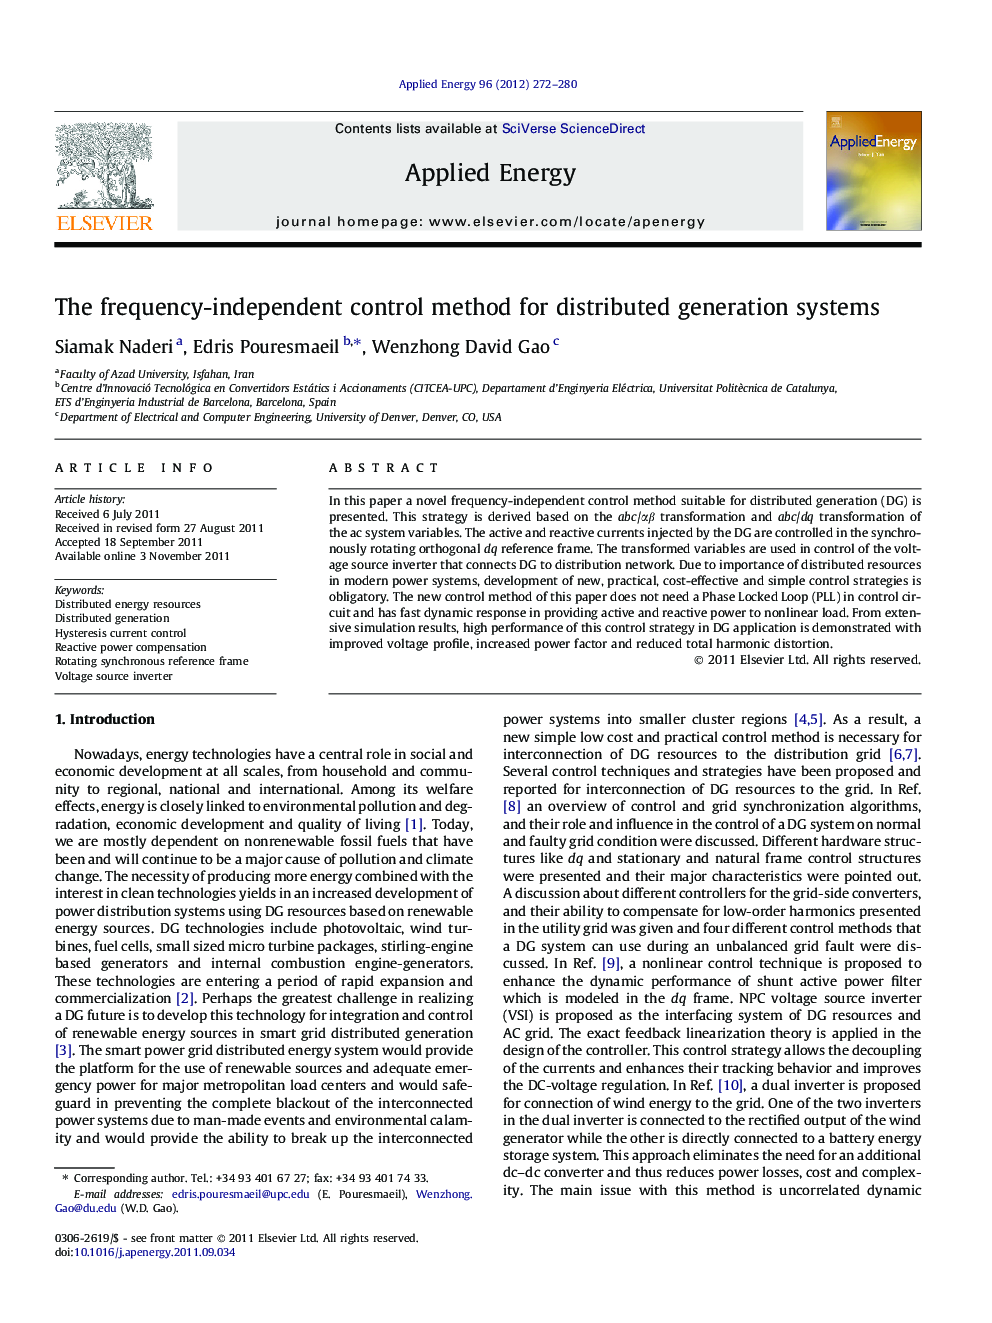 The frequency-independent control method for distributed generation systems